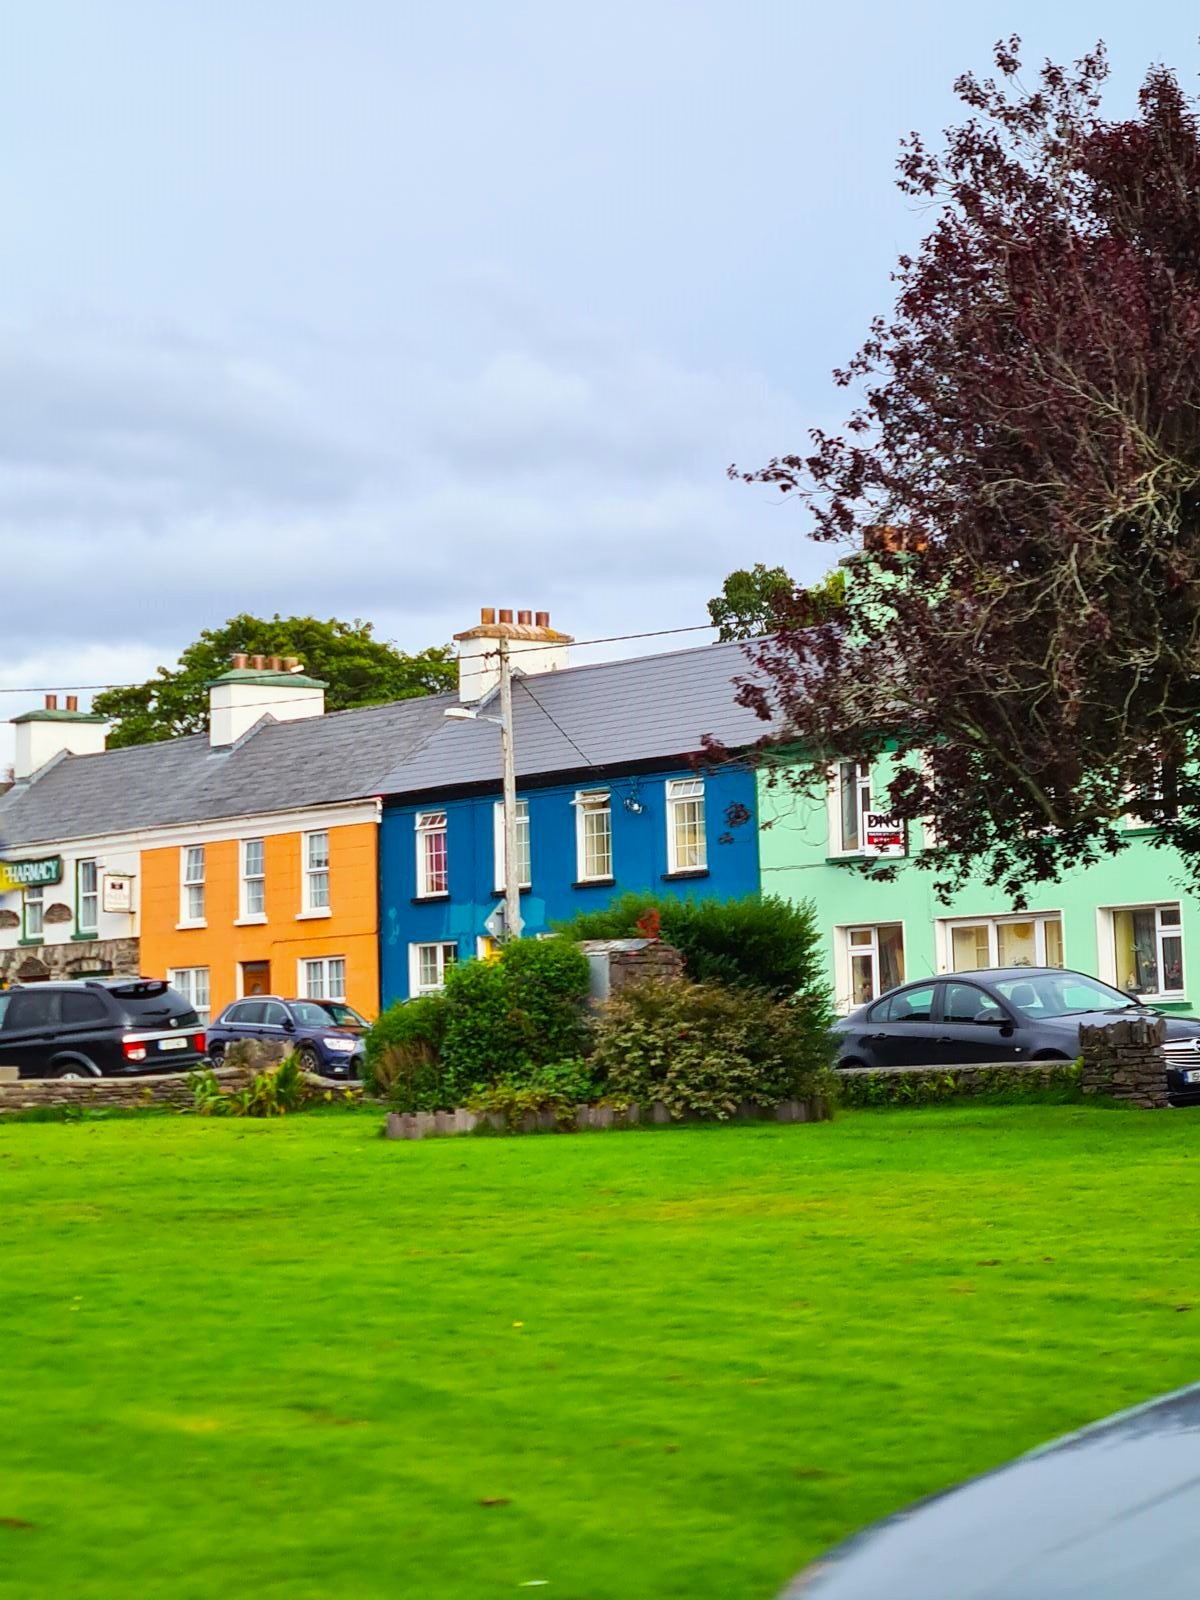  Colourful houses lining the street with a large grass yard in front 